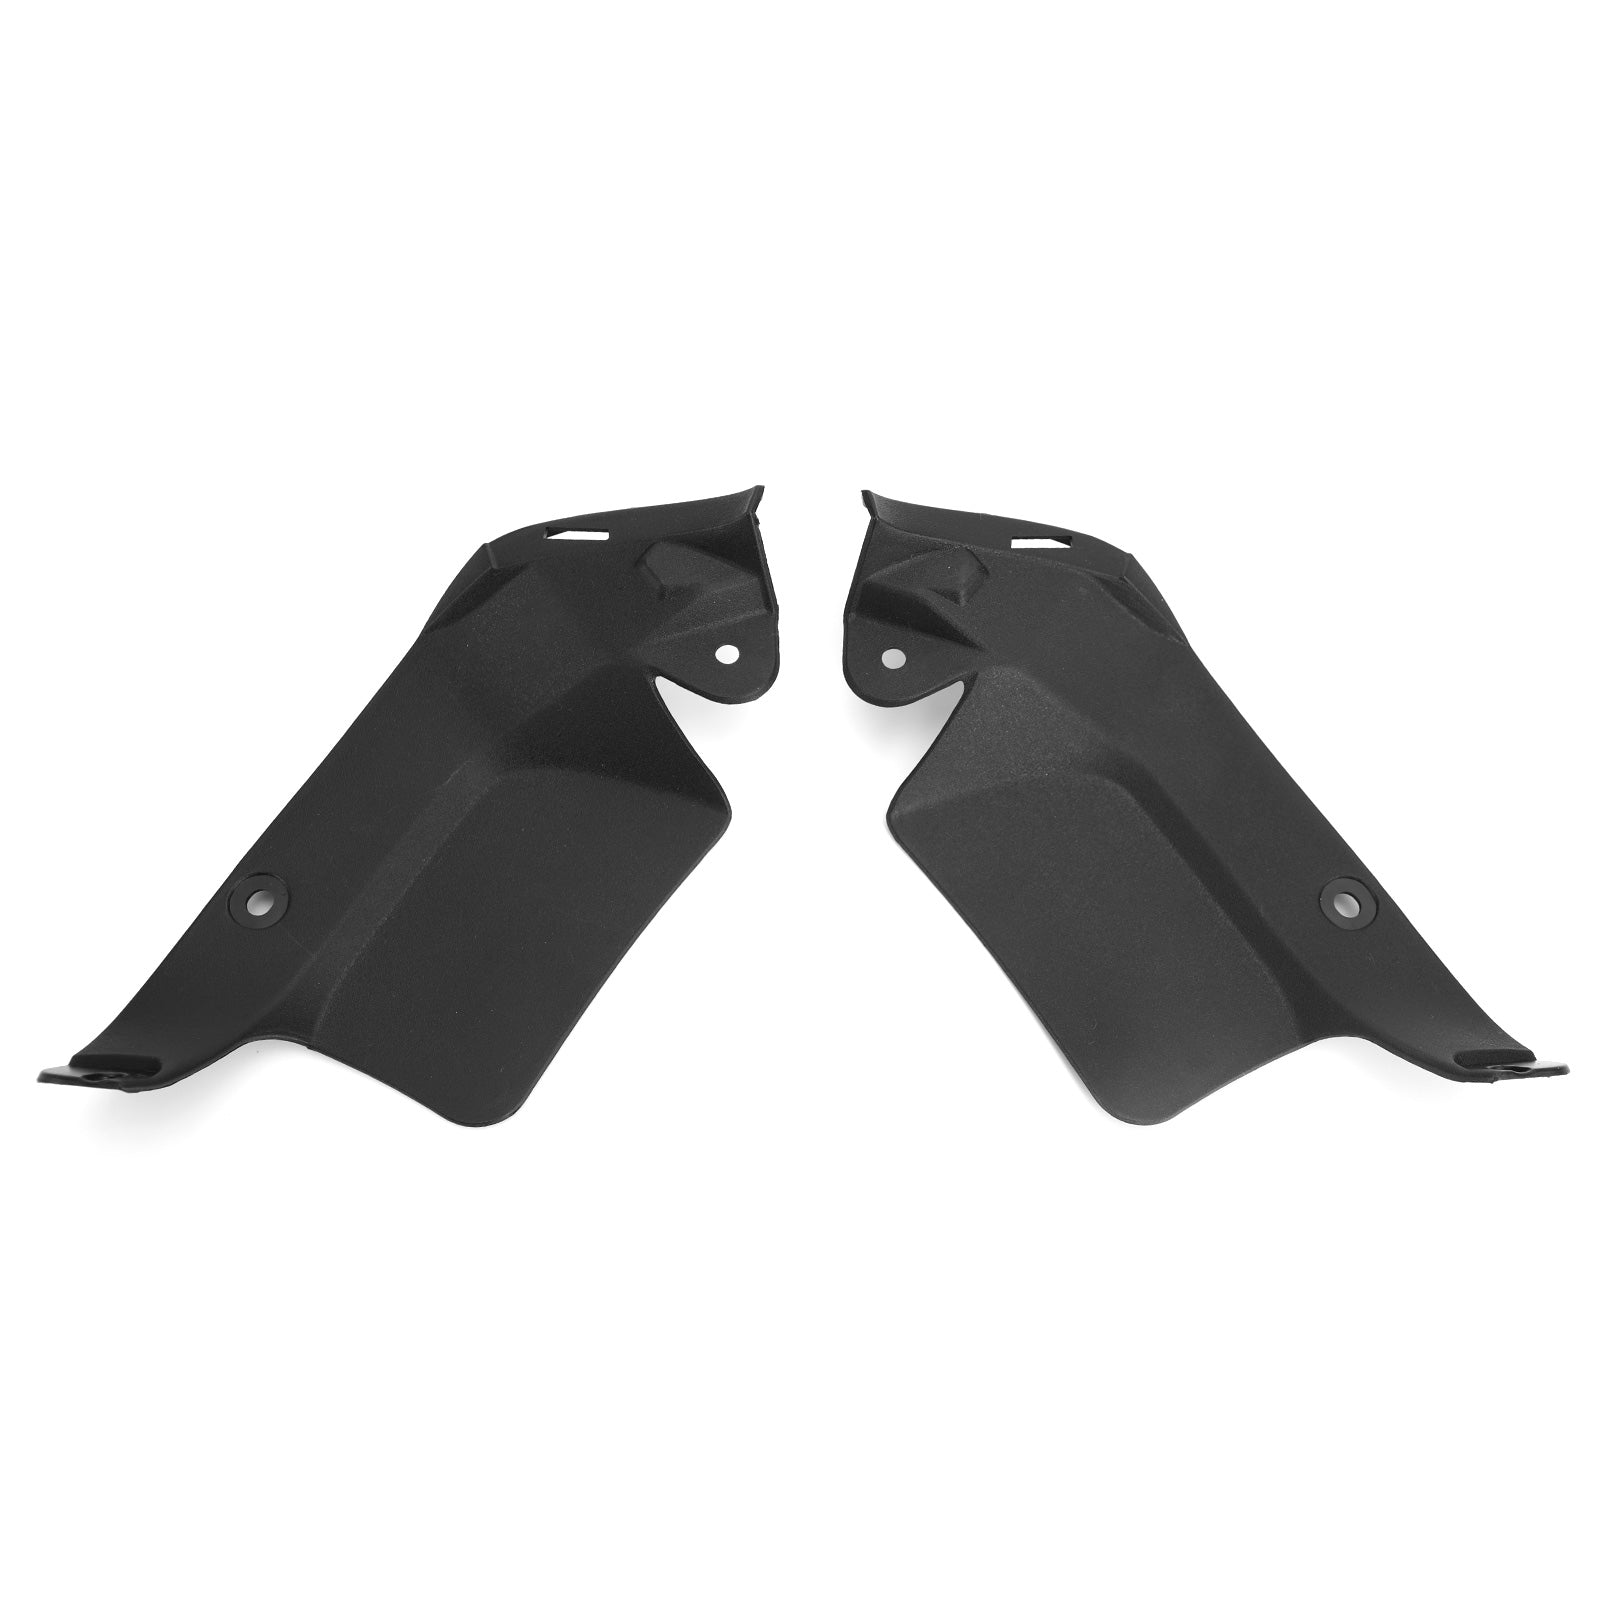 Bodywork Fairing ABS Injection Molding Unpainted fits for Honda X-ADV 750 2017-2020